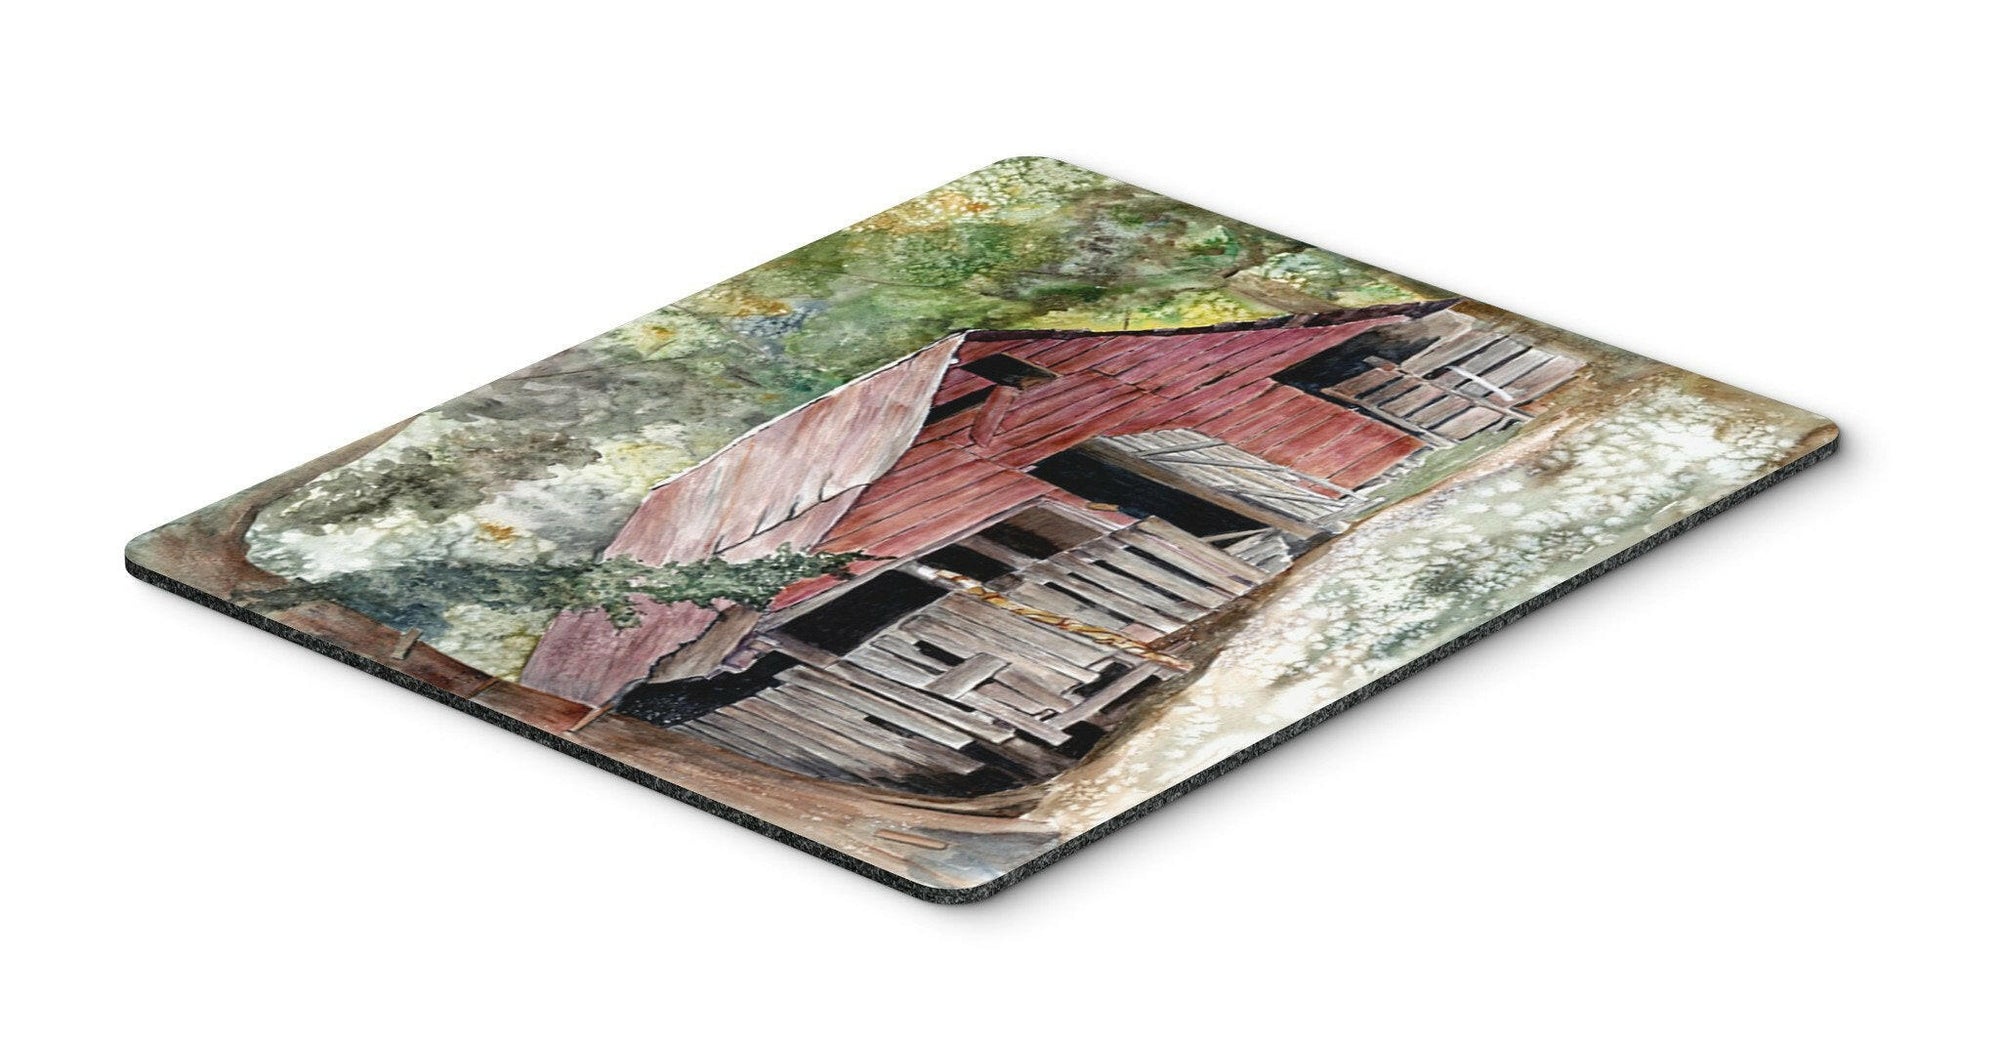 Old Barn Mouse pad, hot pad, or trivet by Caroline's Treasures